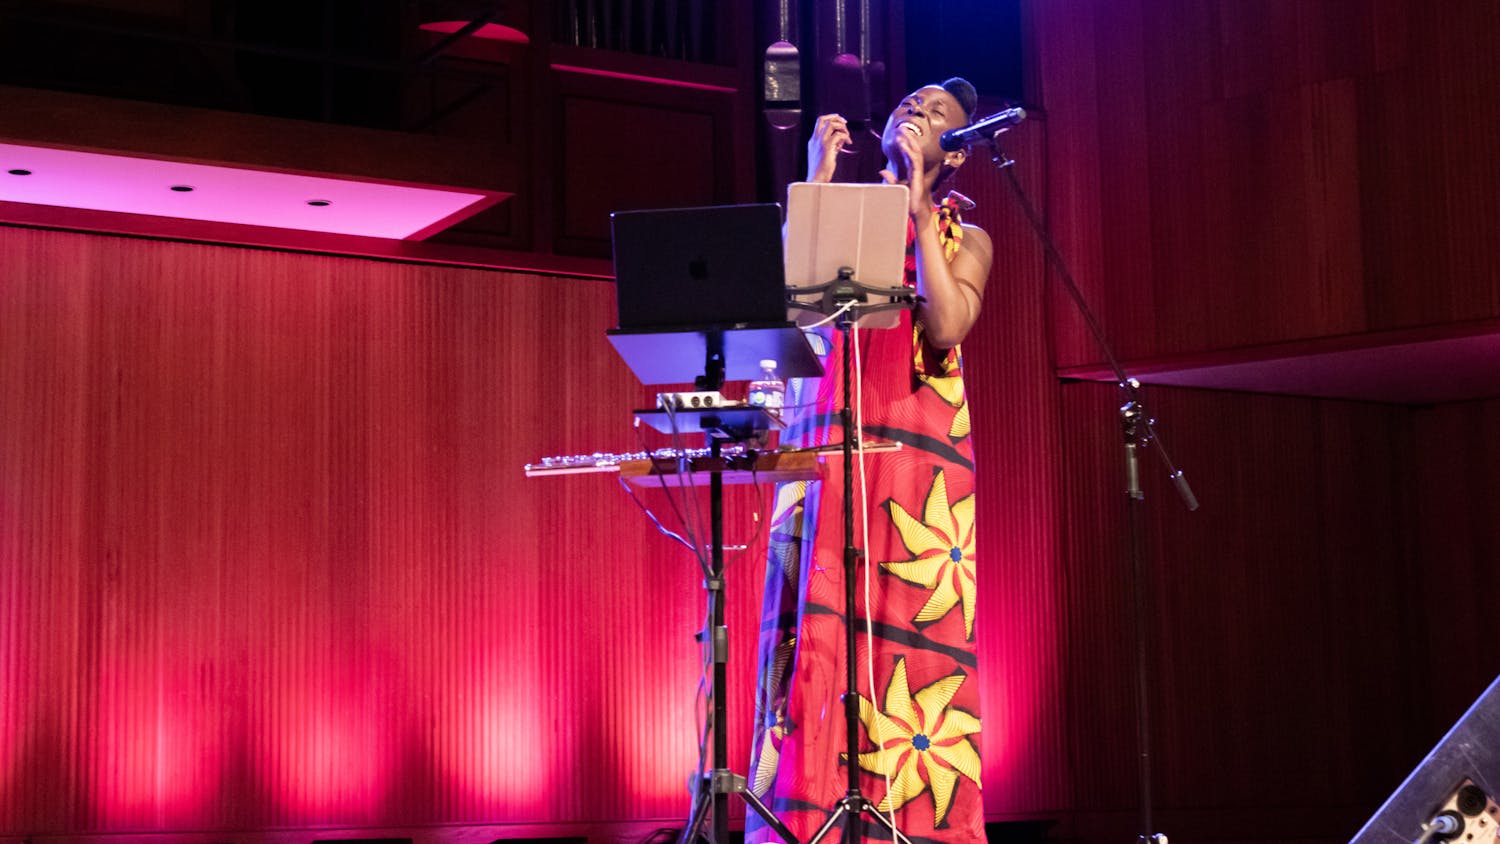 Nathalie Joachim, a Grammy-nominated Haitian-American composer, flutist and vocalist, performed in Lippes Concert Hall on Saturday.&nbsp;